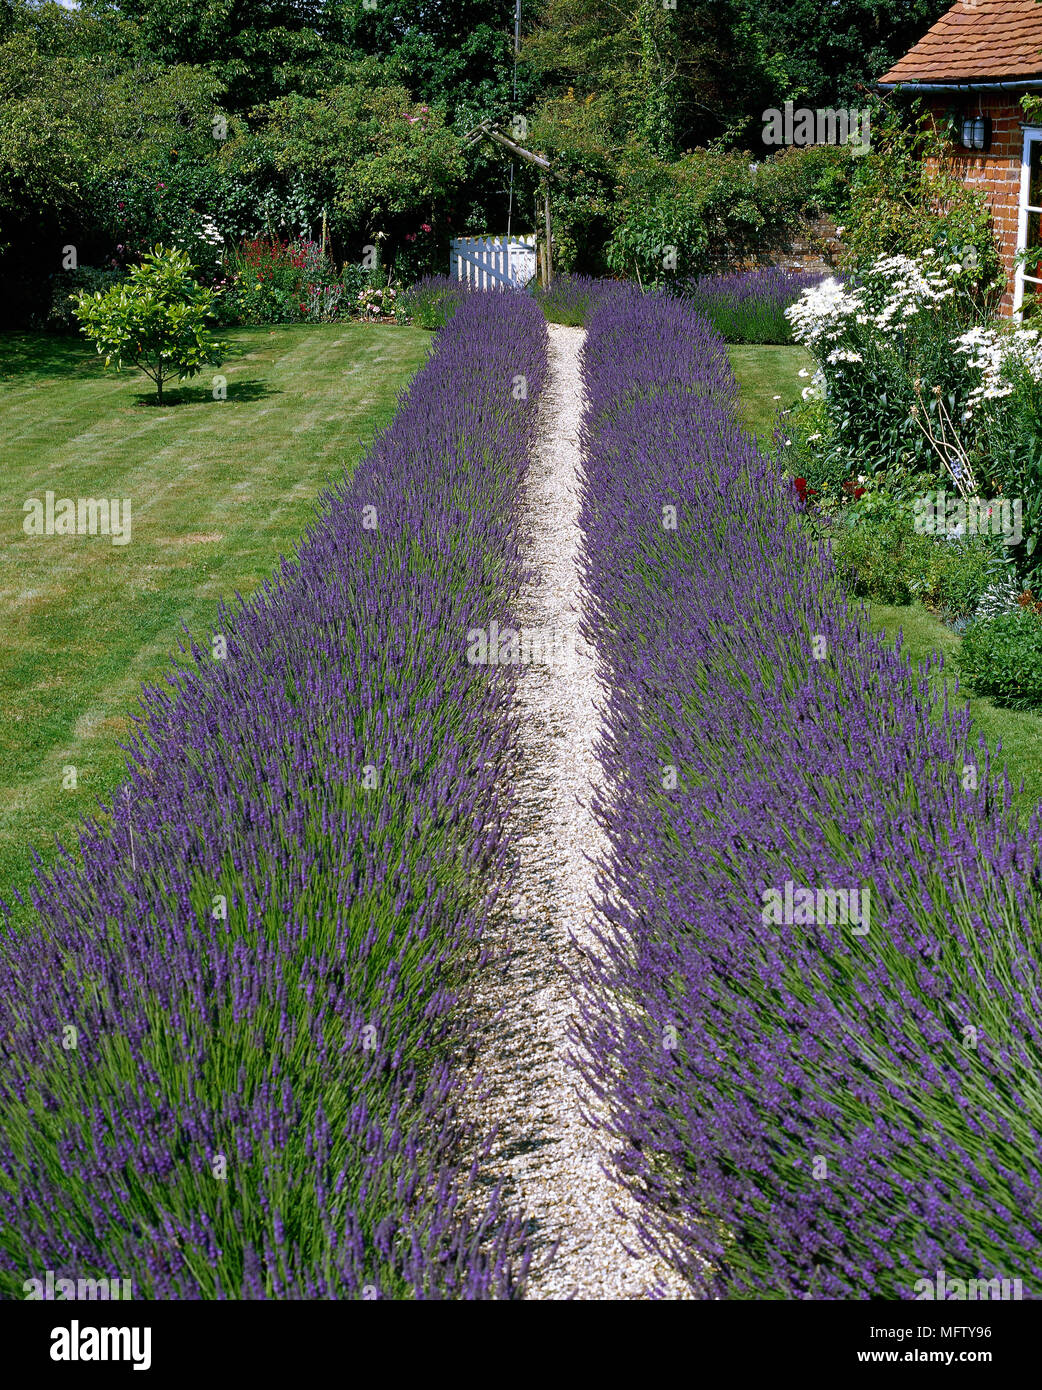 A country garden with paved path and lavender borders, Stock Photo